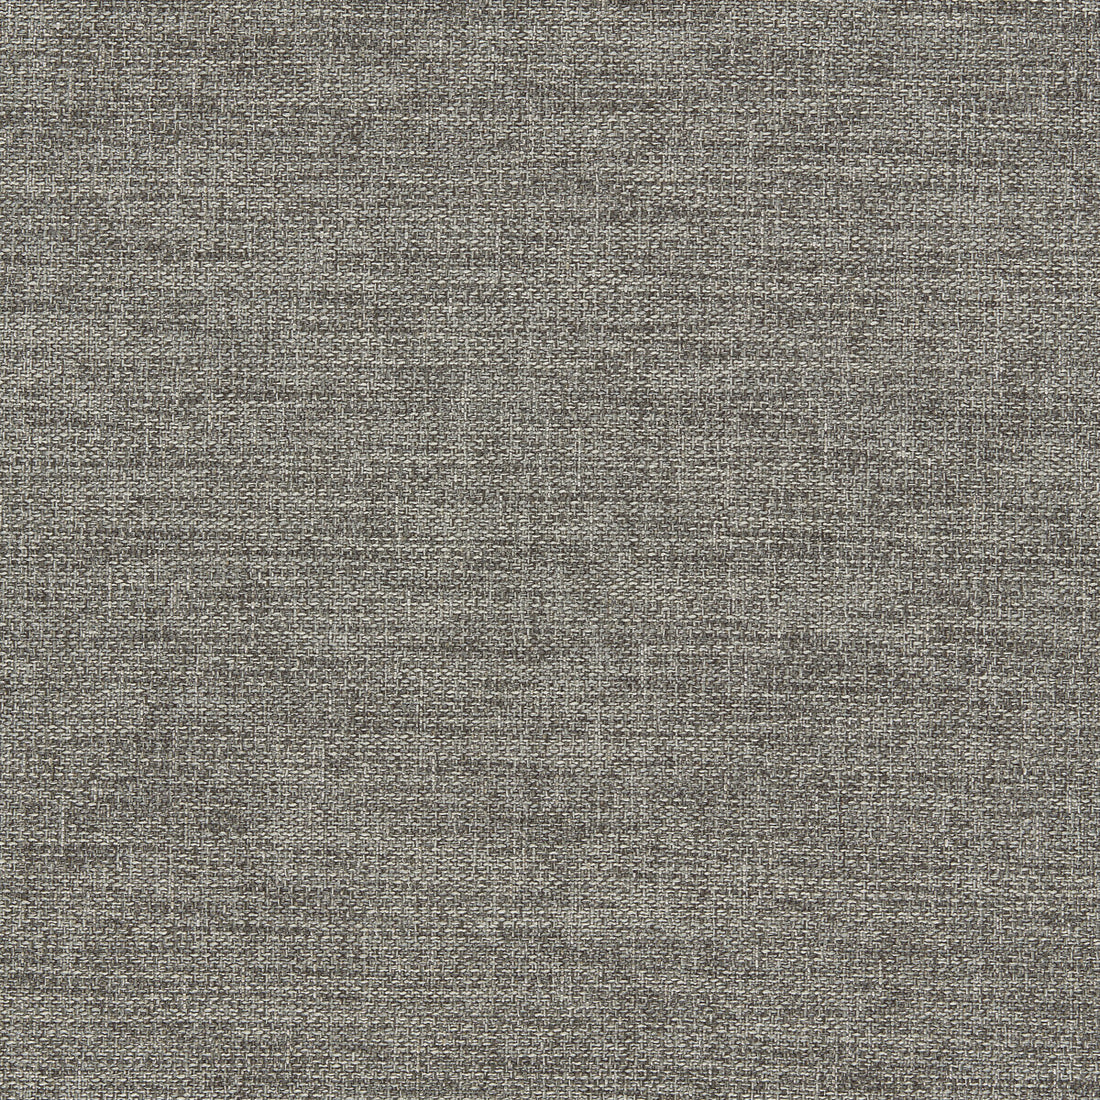 Llanara fabric in grey color - pattern F1422/03.CAC.0 - by Clarke And Clarke in the Clarke &amp; Clarke Purus collection